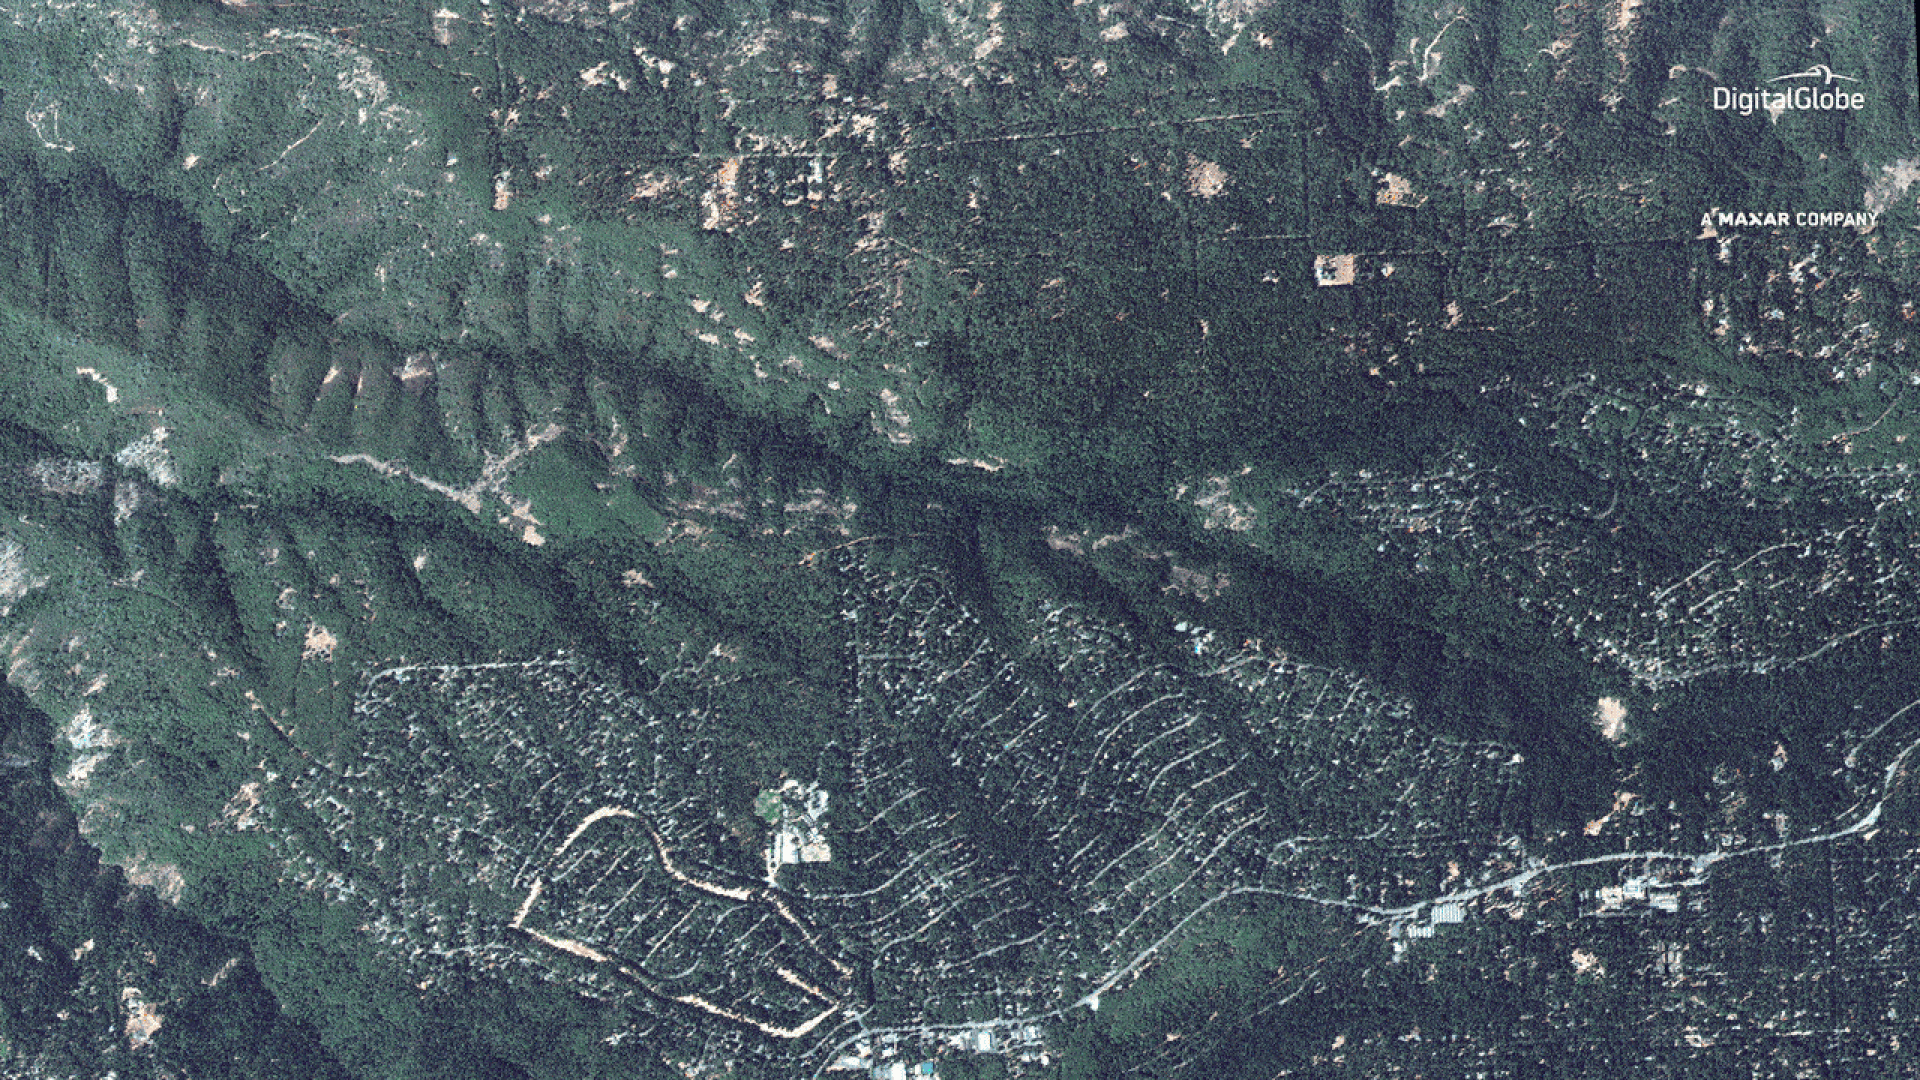 Satellite images of Paradise, California, showing the community before and during the Camp Fire.